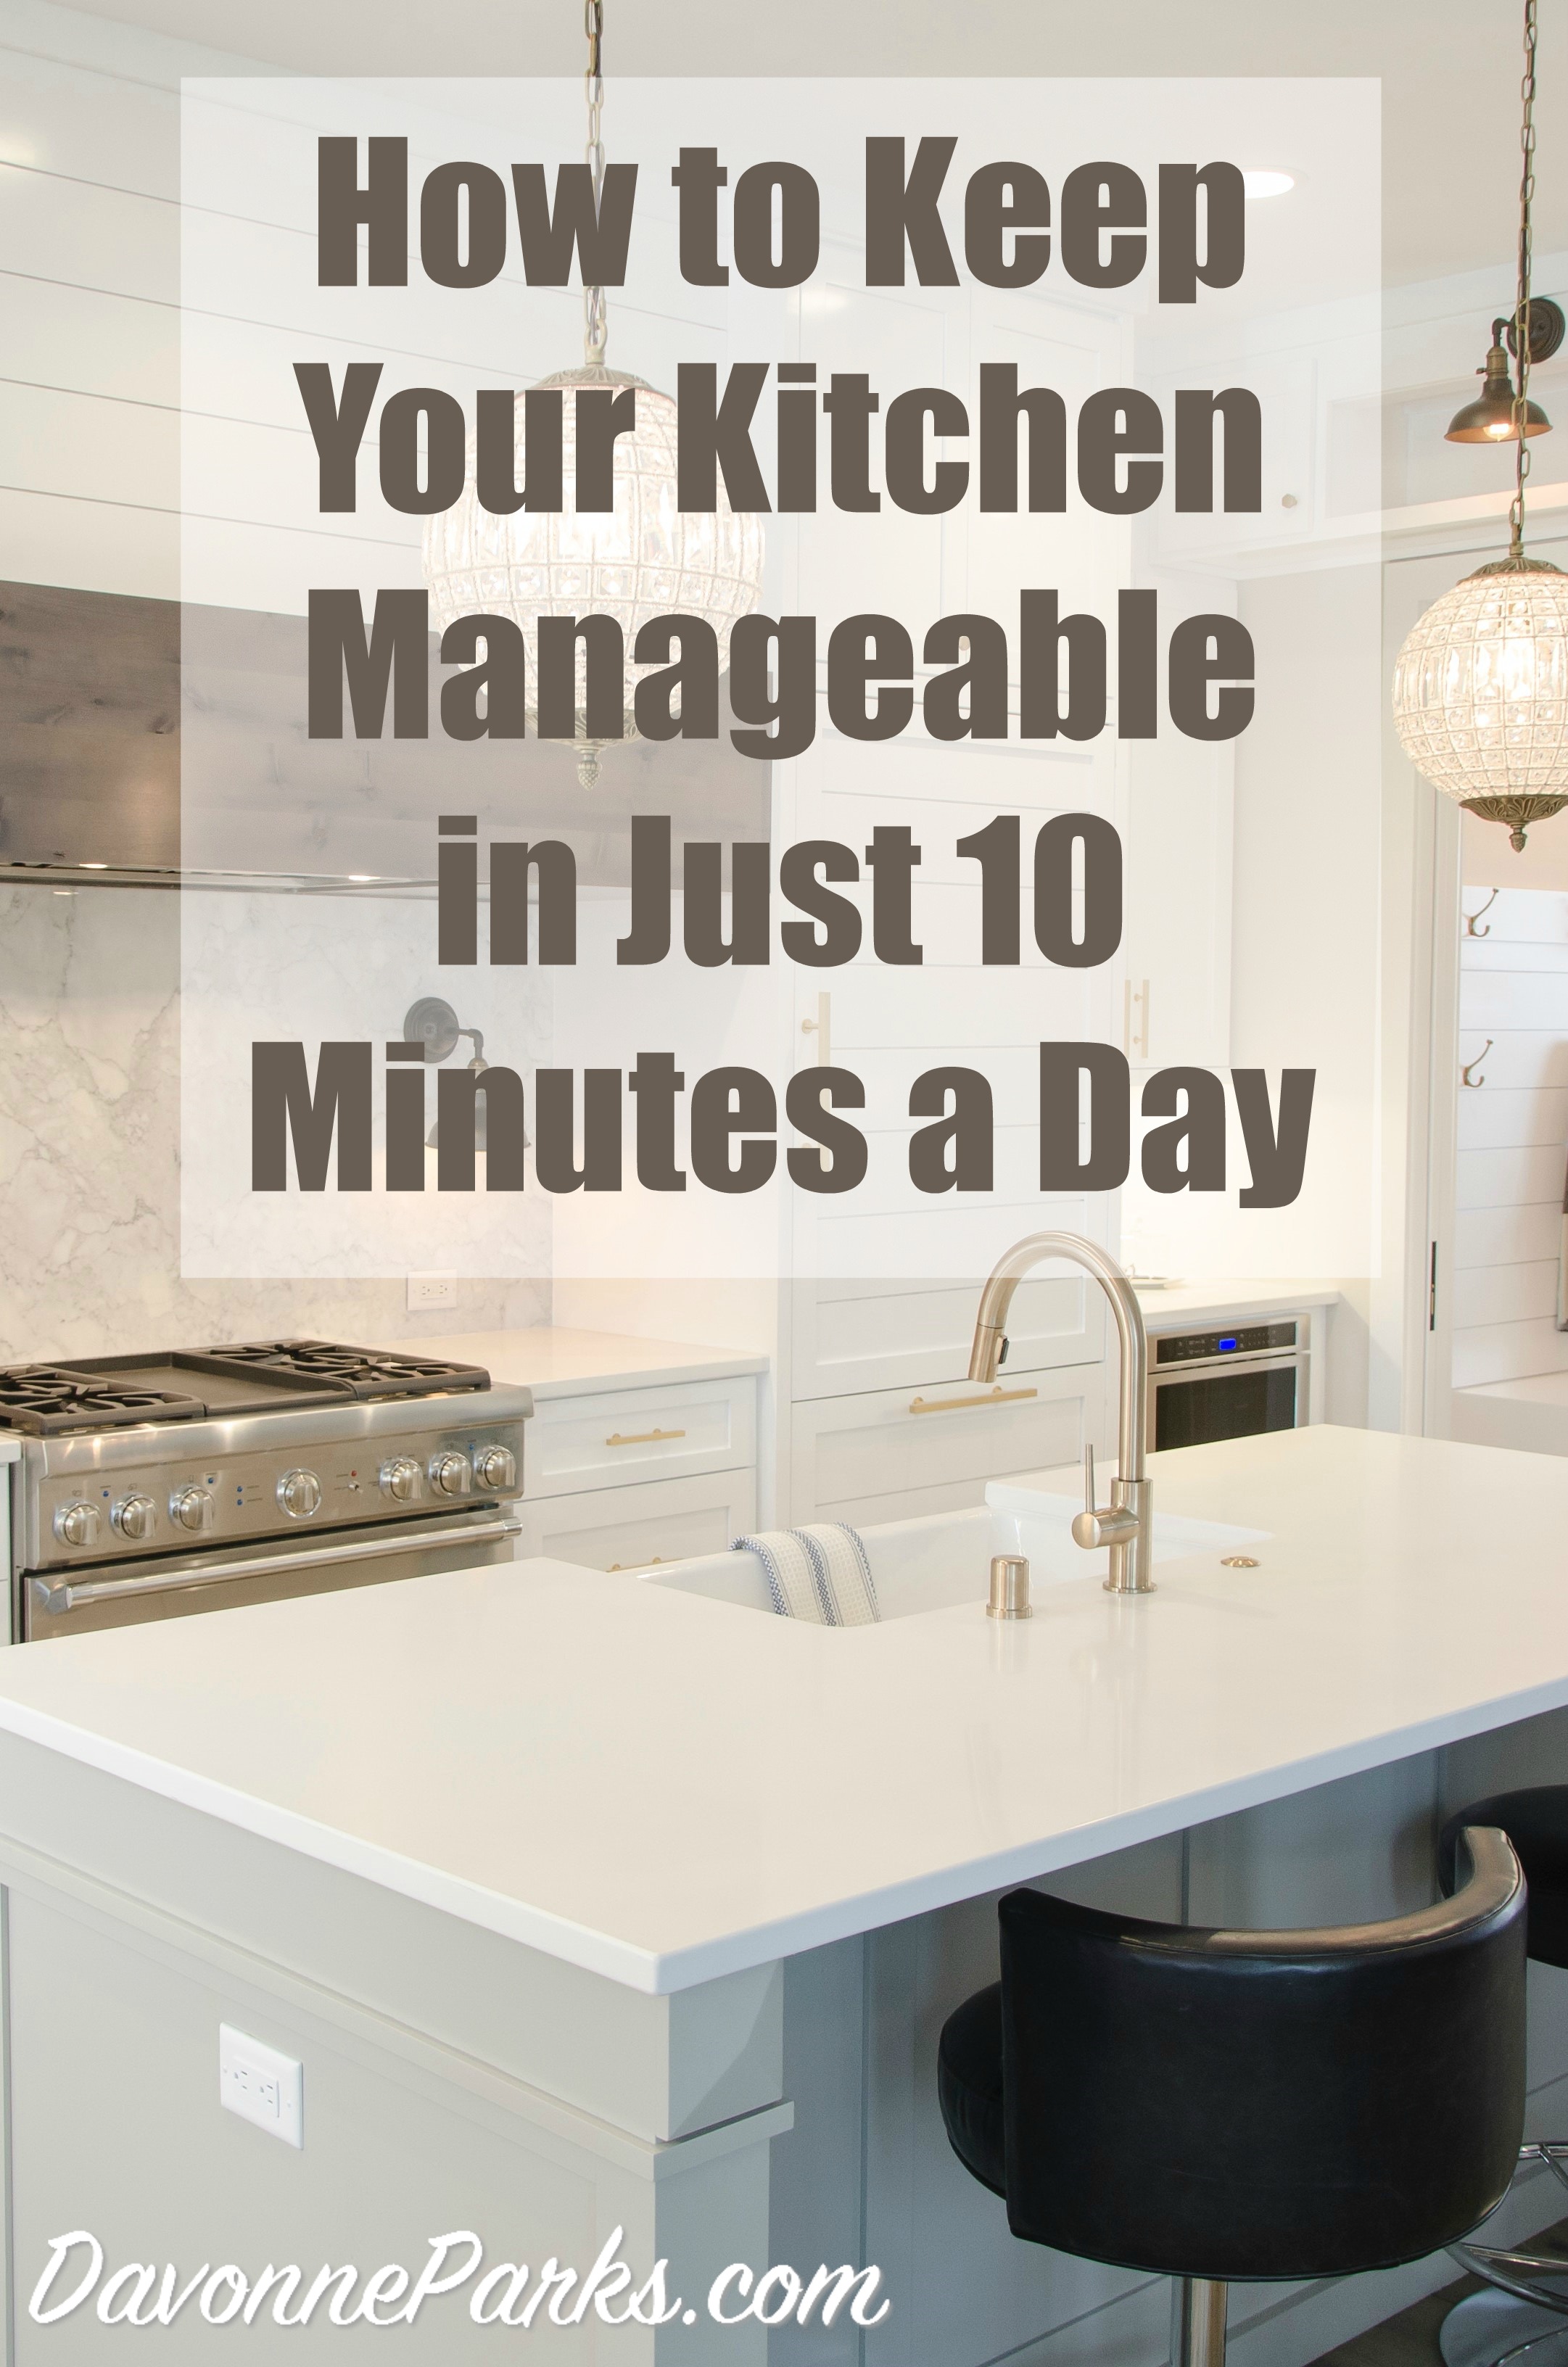 How to Keep Your Kitchen Manageable in Just 15 Minutes a Day